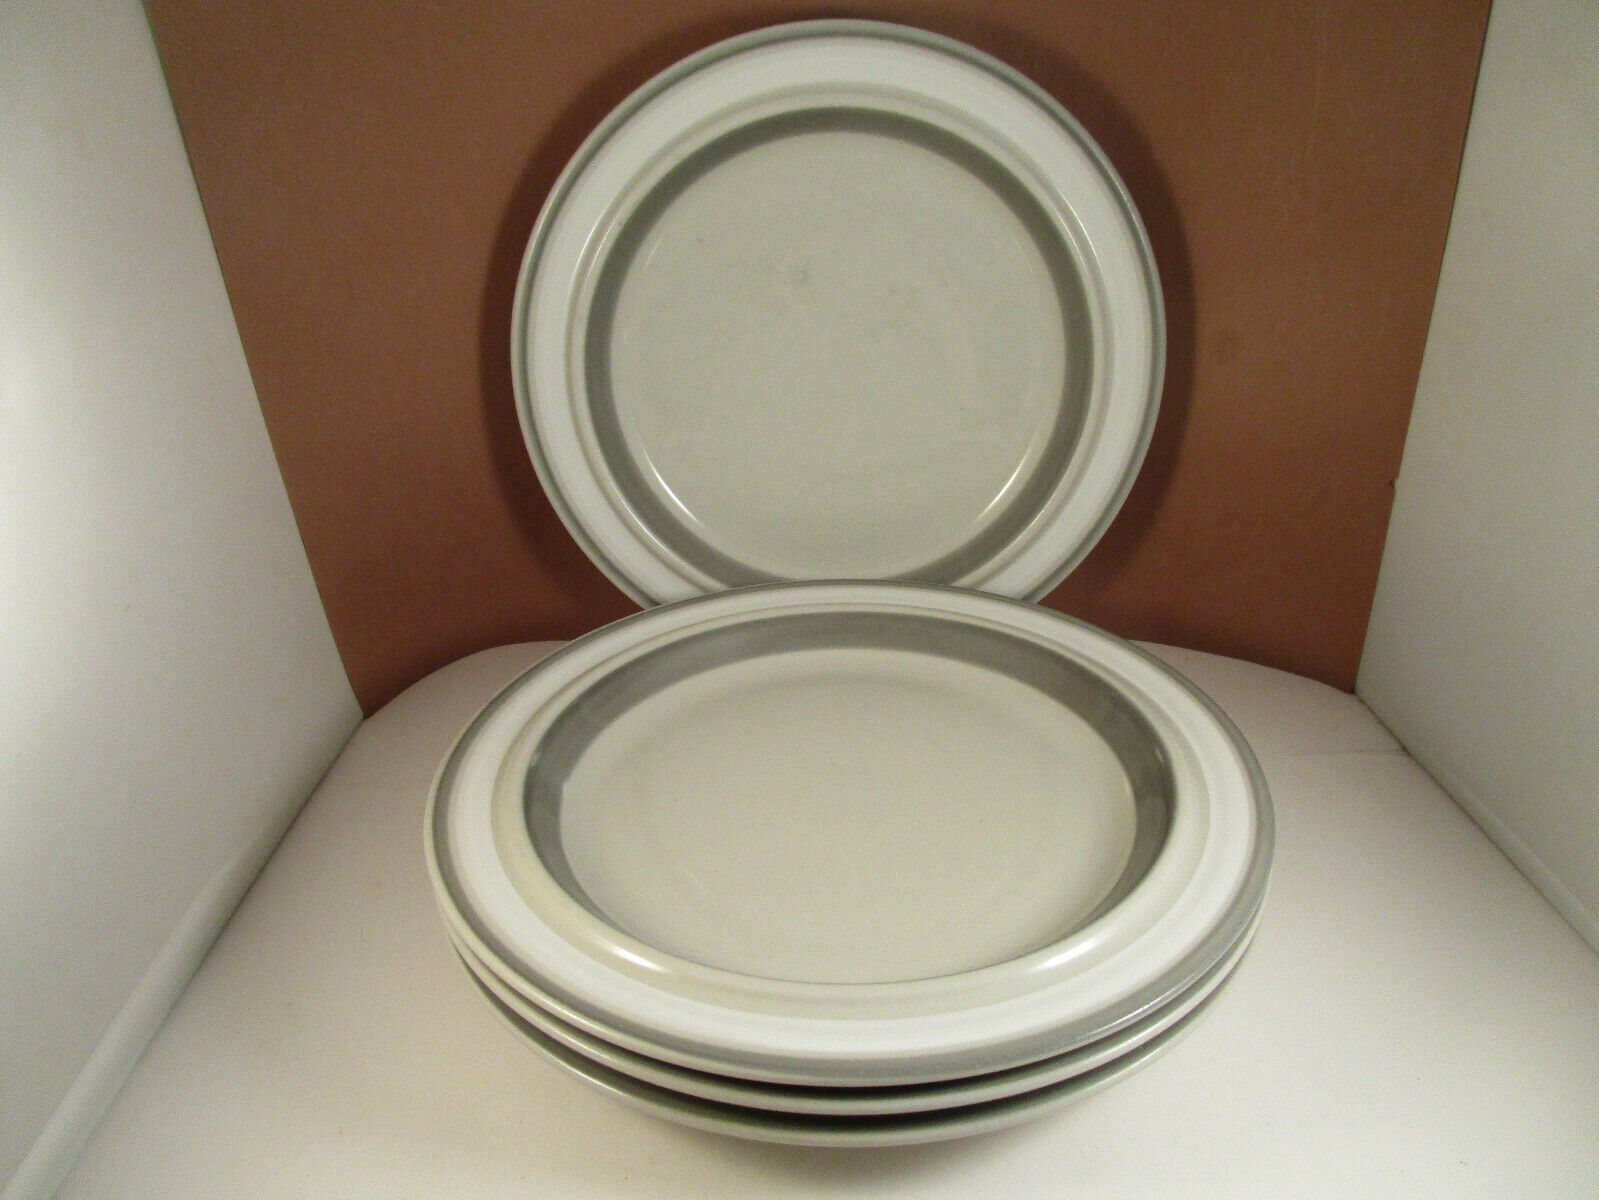 Read more about the article Vintage Arabia Finland Salla Set of 4 Dinner Plates C